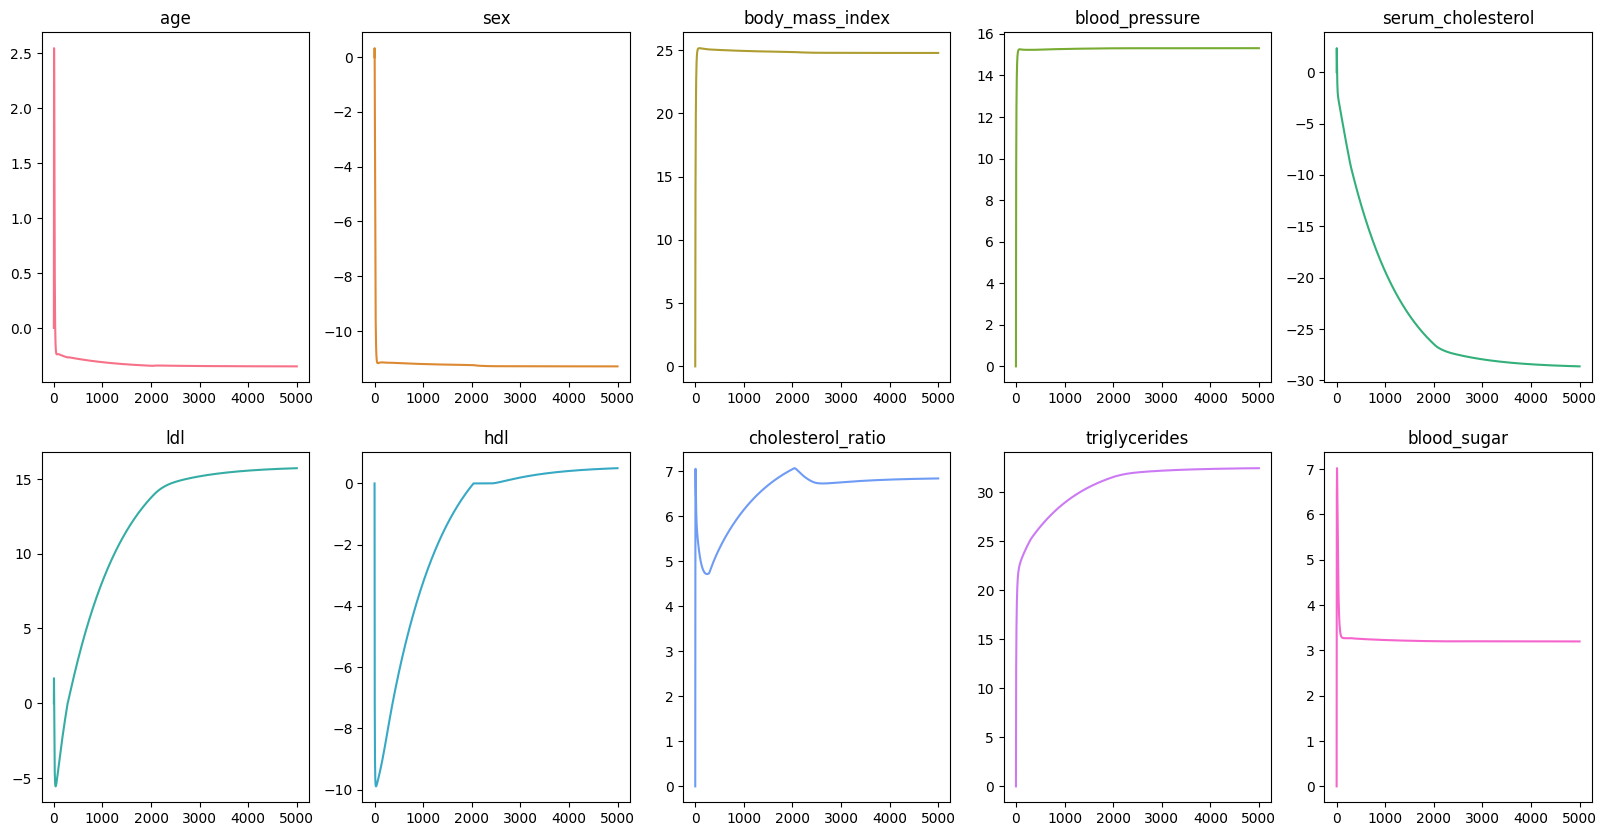 Changes in coefficients over time with regularization